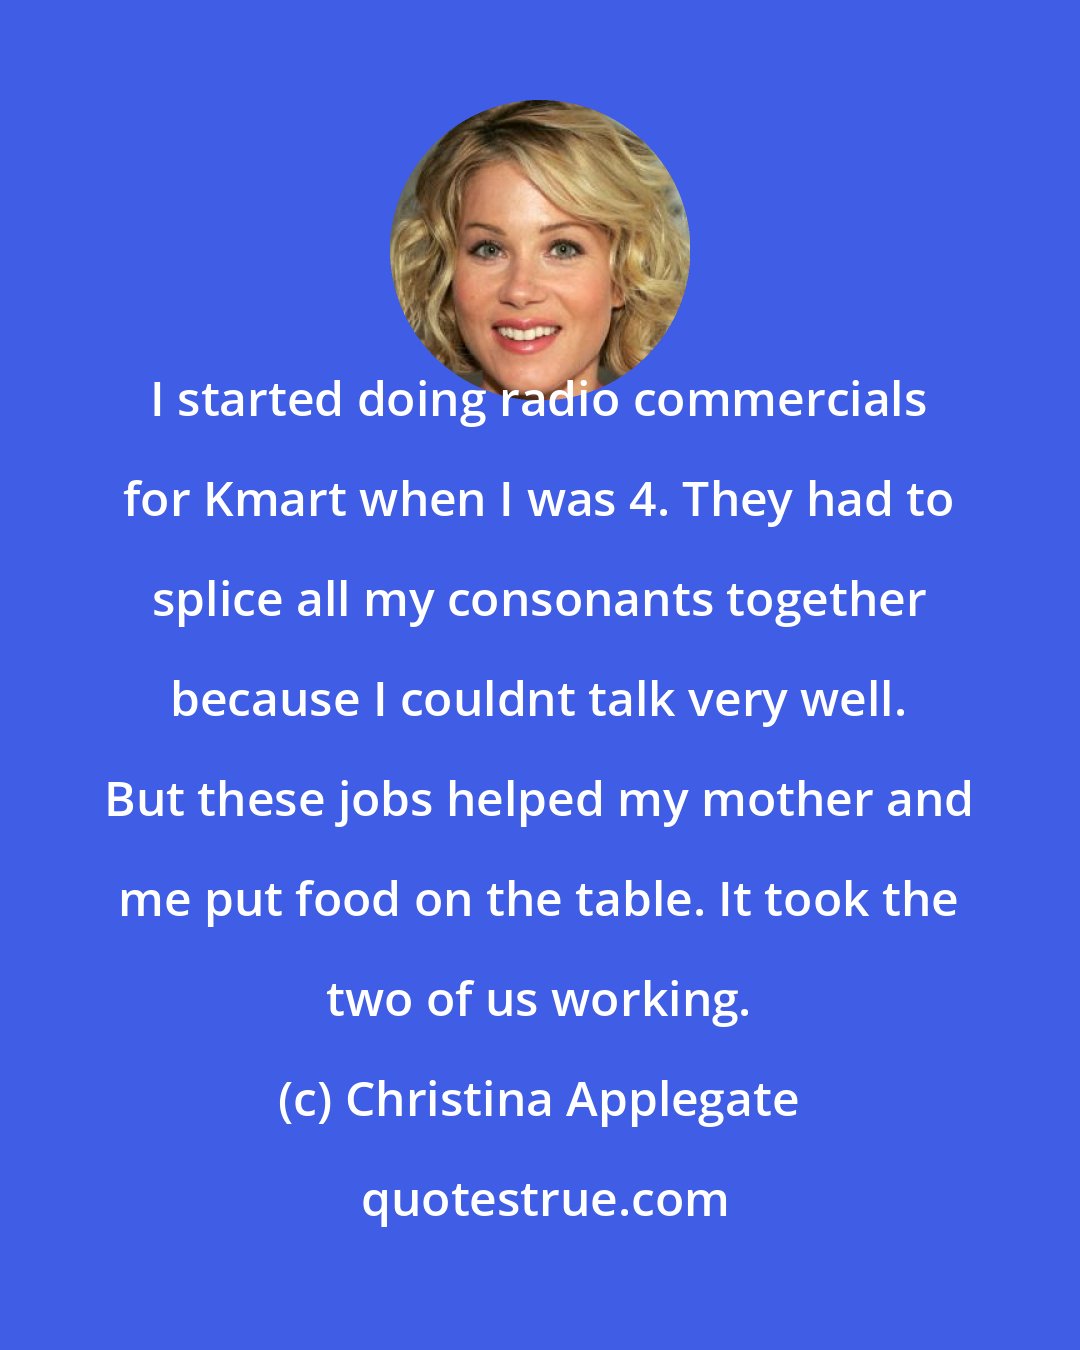 Christina Applegate: I started doing radio commercials for Kmart when I was 4. They had to splice all my consonants together because I couldnt talk very well. But these jobs helped my mother and me put food on the table. It took the two of us working.